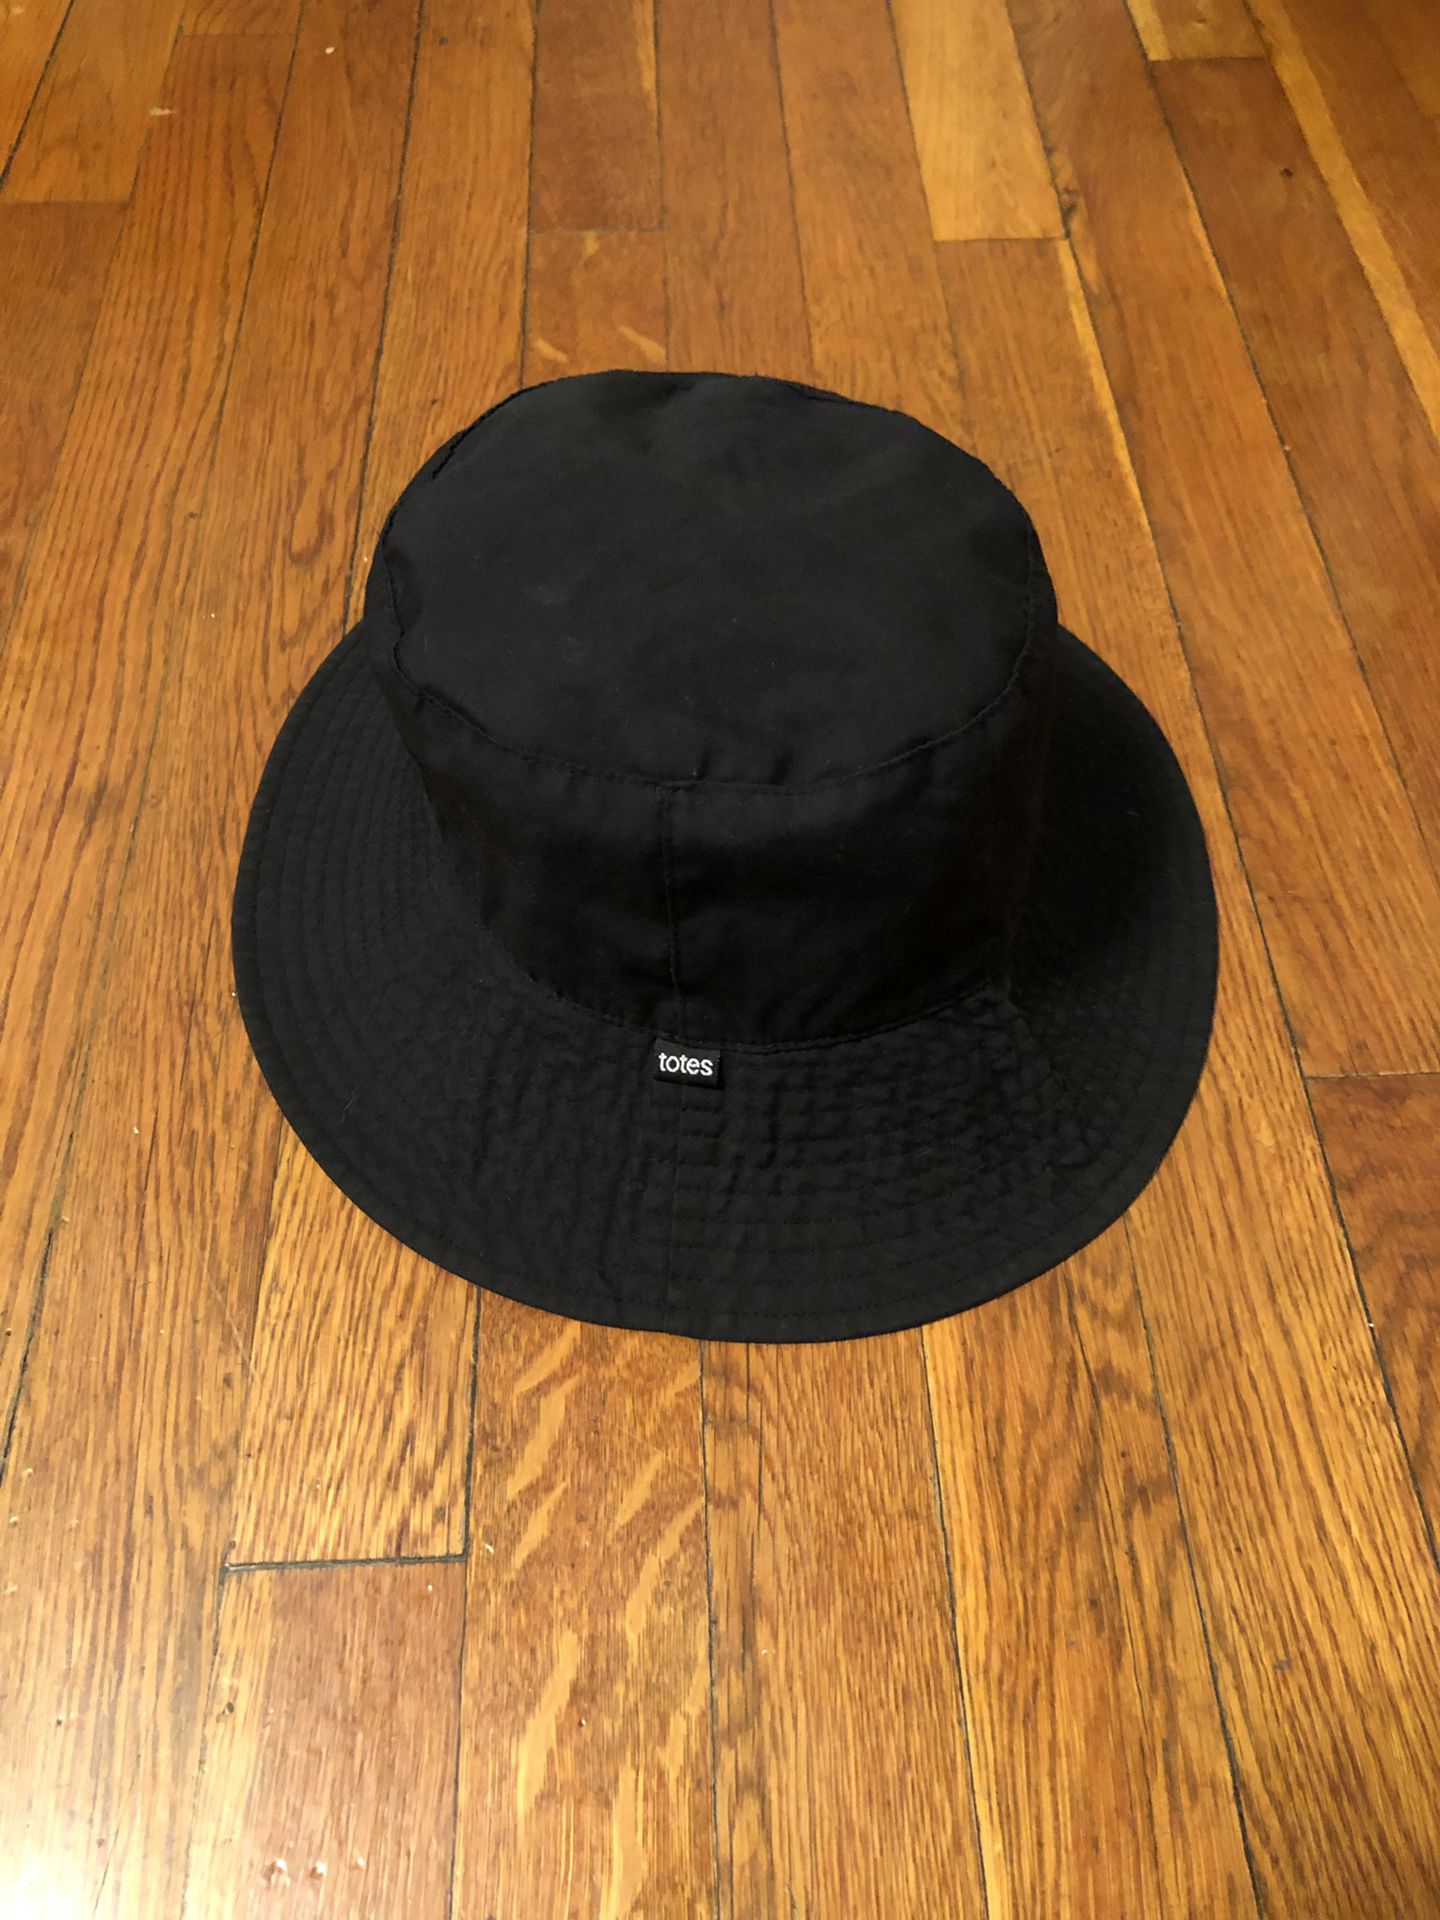 Totes bucket hat paid $28 good condition